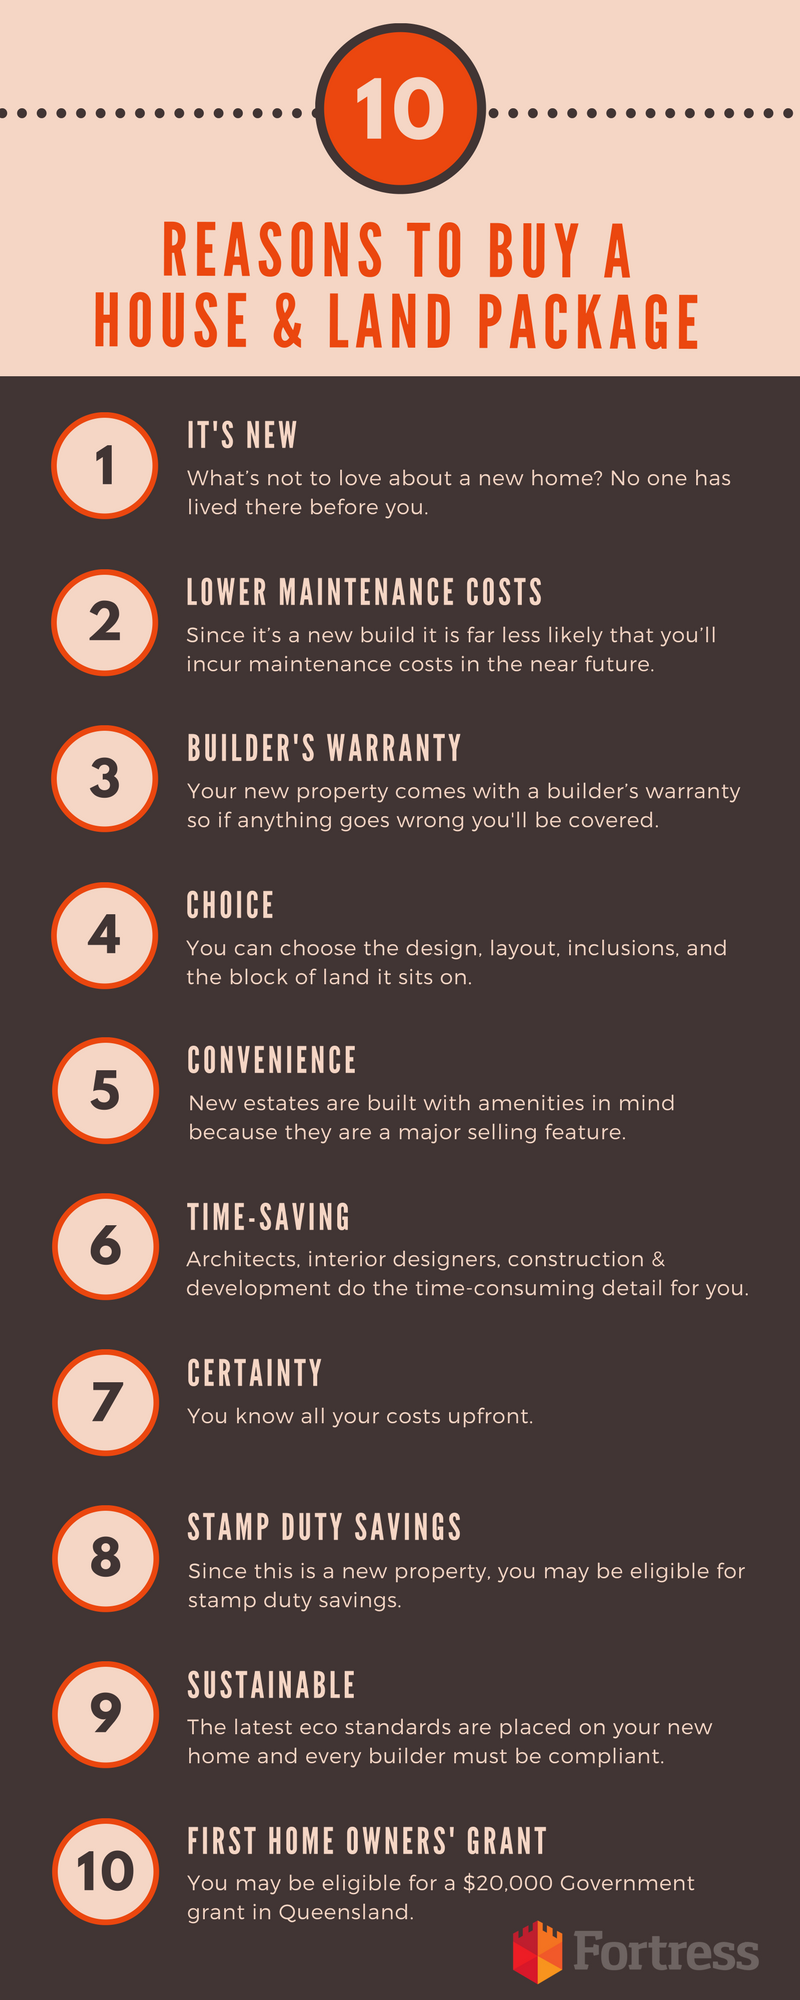 10 reasons to buy a house and land package infographic (1)